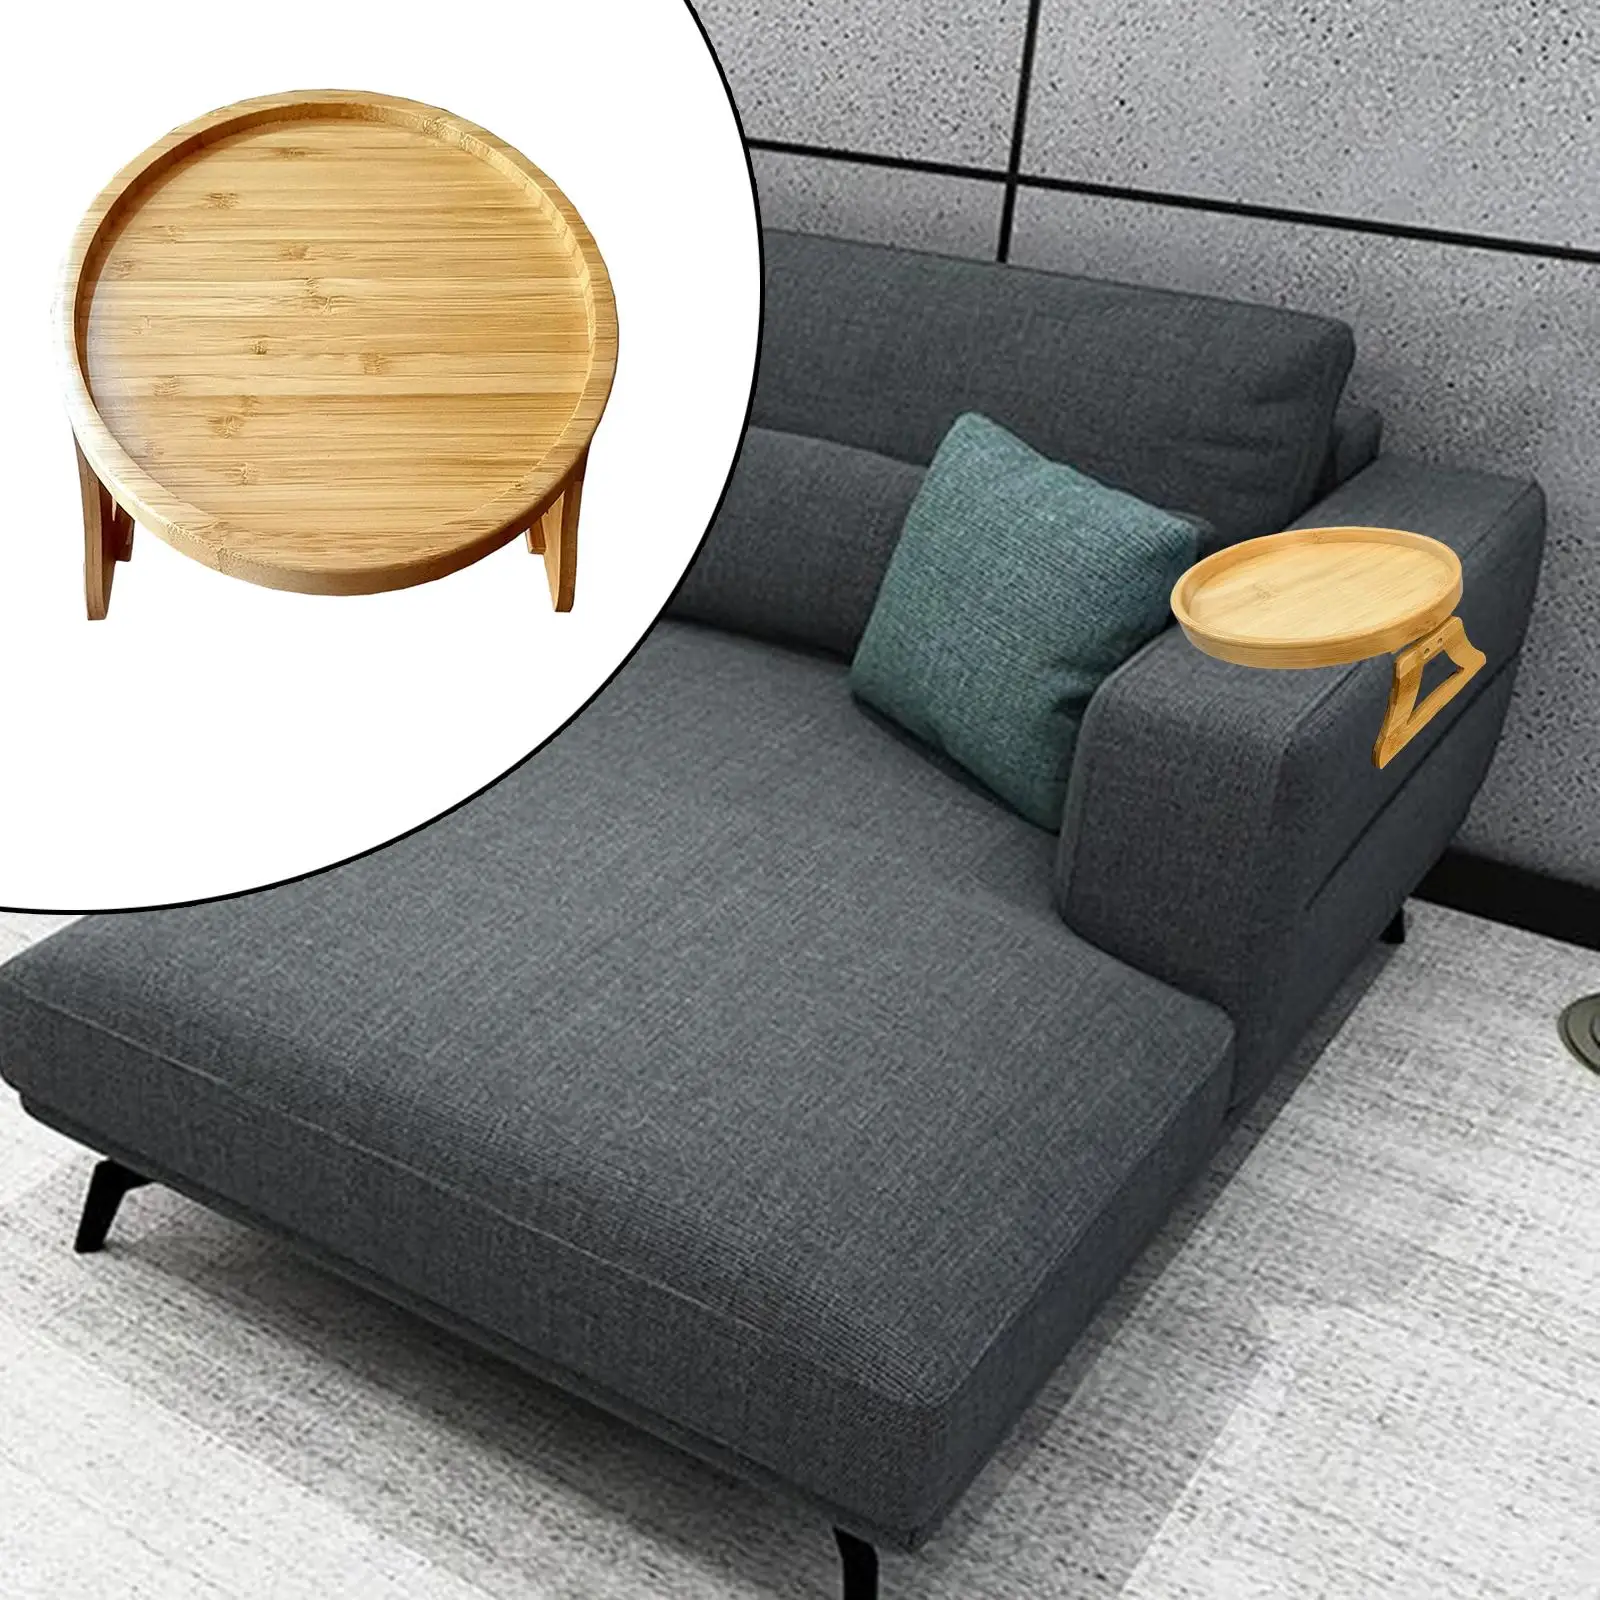 Modern Sofa Armrest Tray - Stylish Wooden Tableware for and Drinks